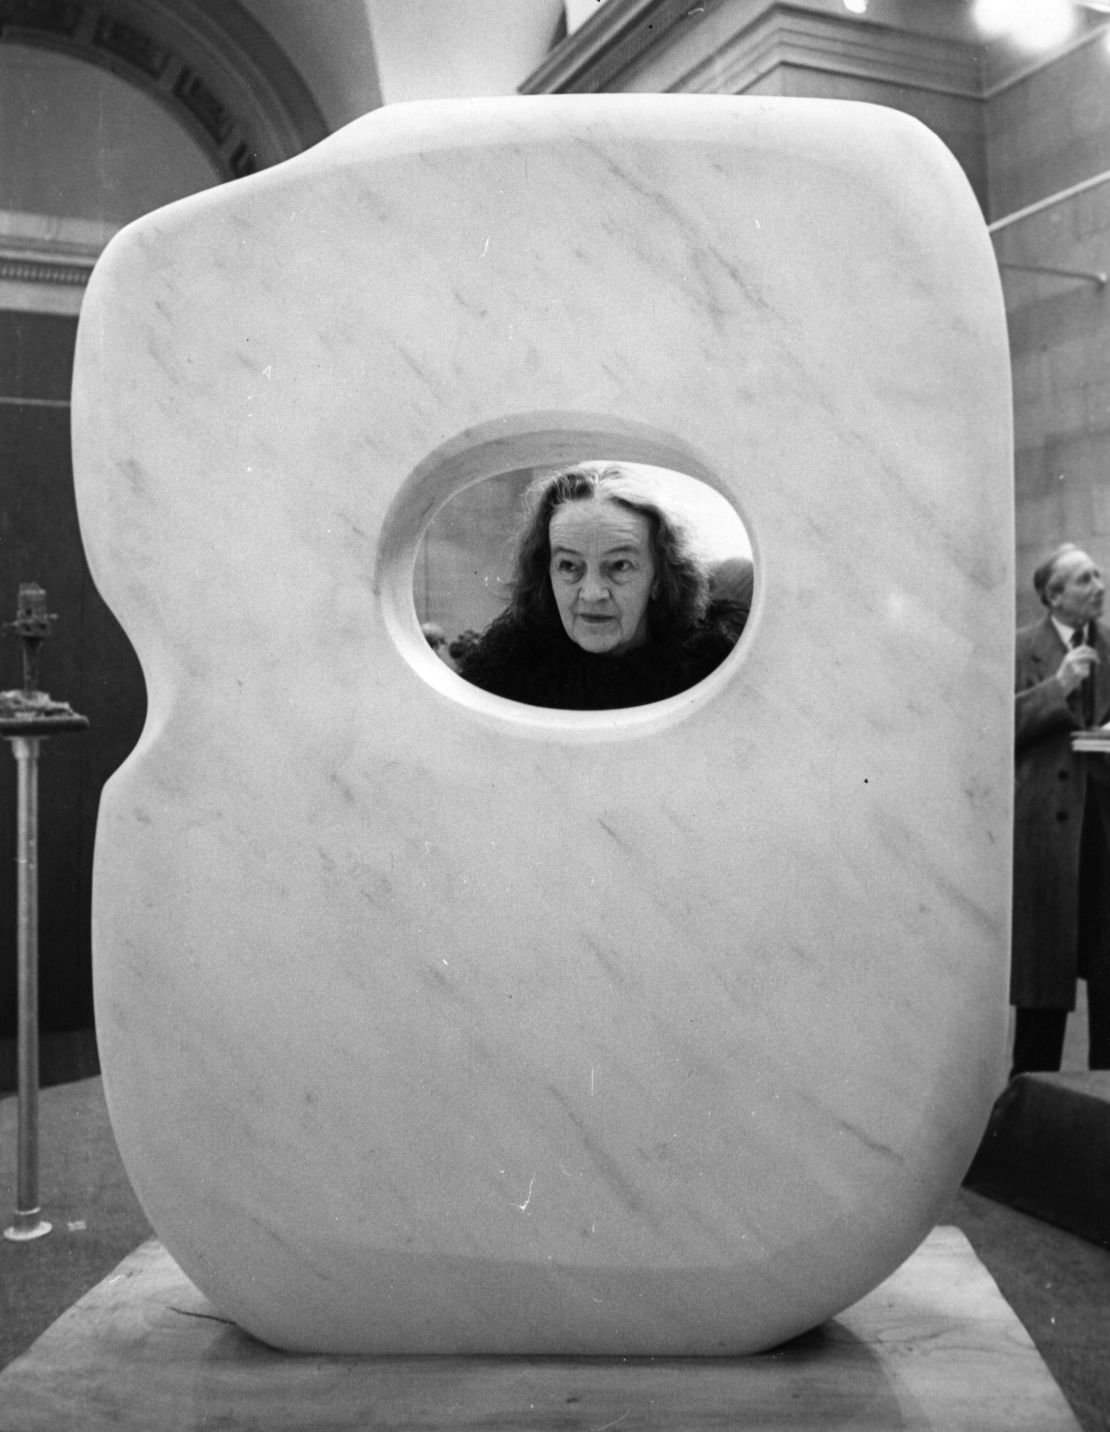 Artist Barbara Hepworth posing through her own work "Pierced Form 1963,"' at the Tate Gallery, London. 